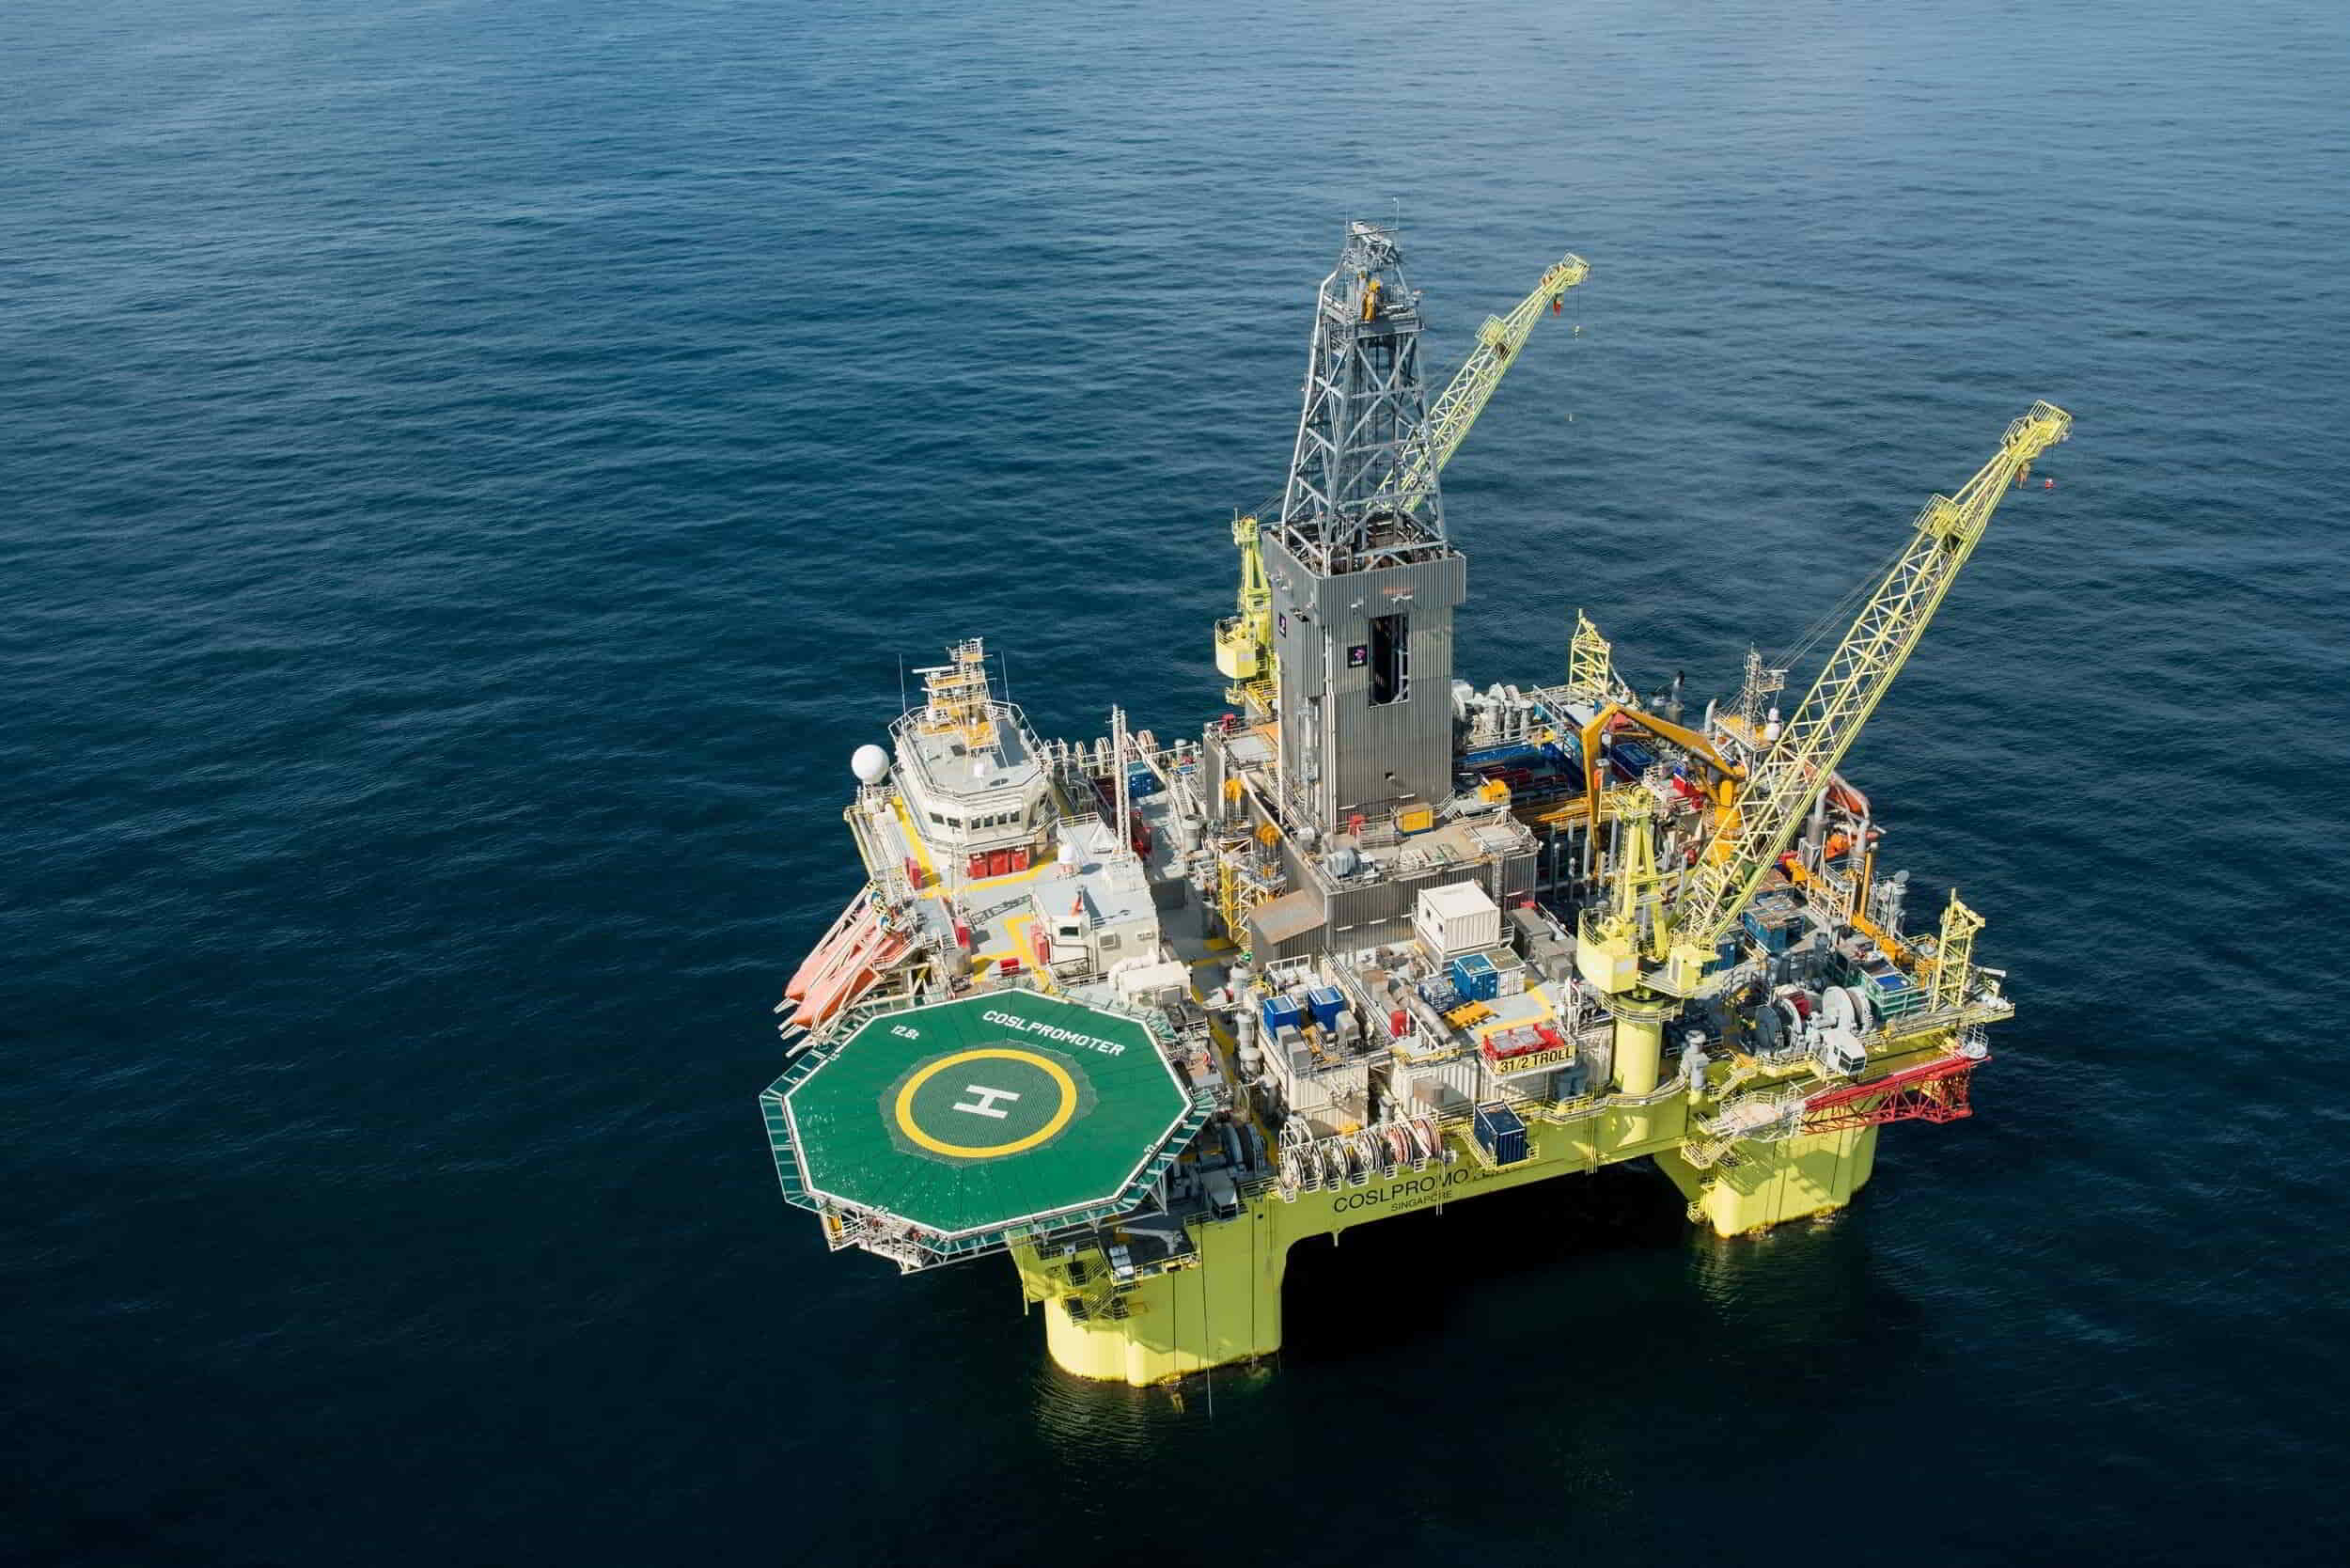 Greenlight for Equinor to undertake ops in North Sea with COSL Drilling’s rig